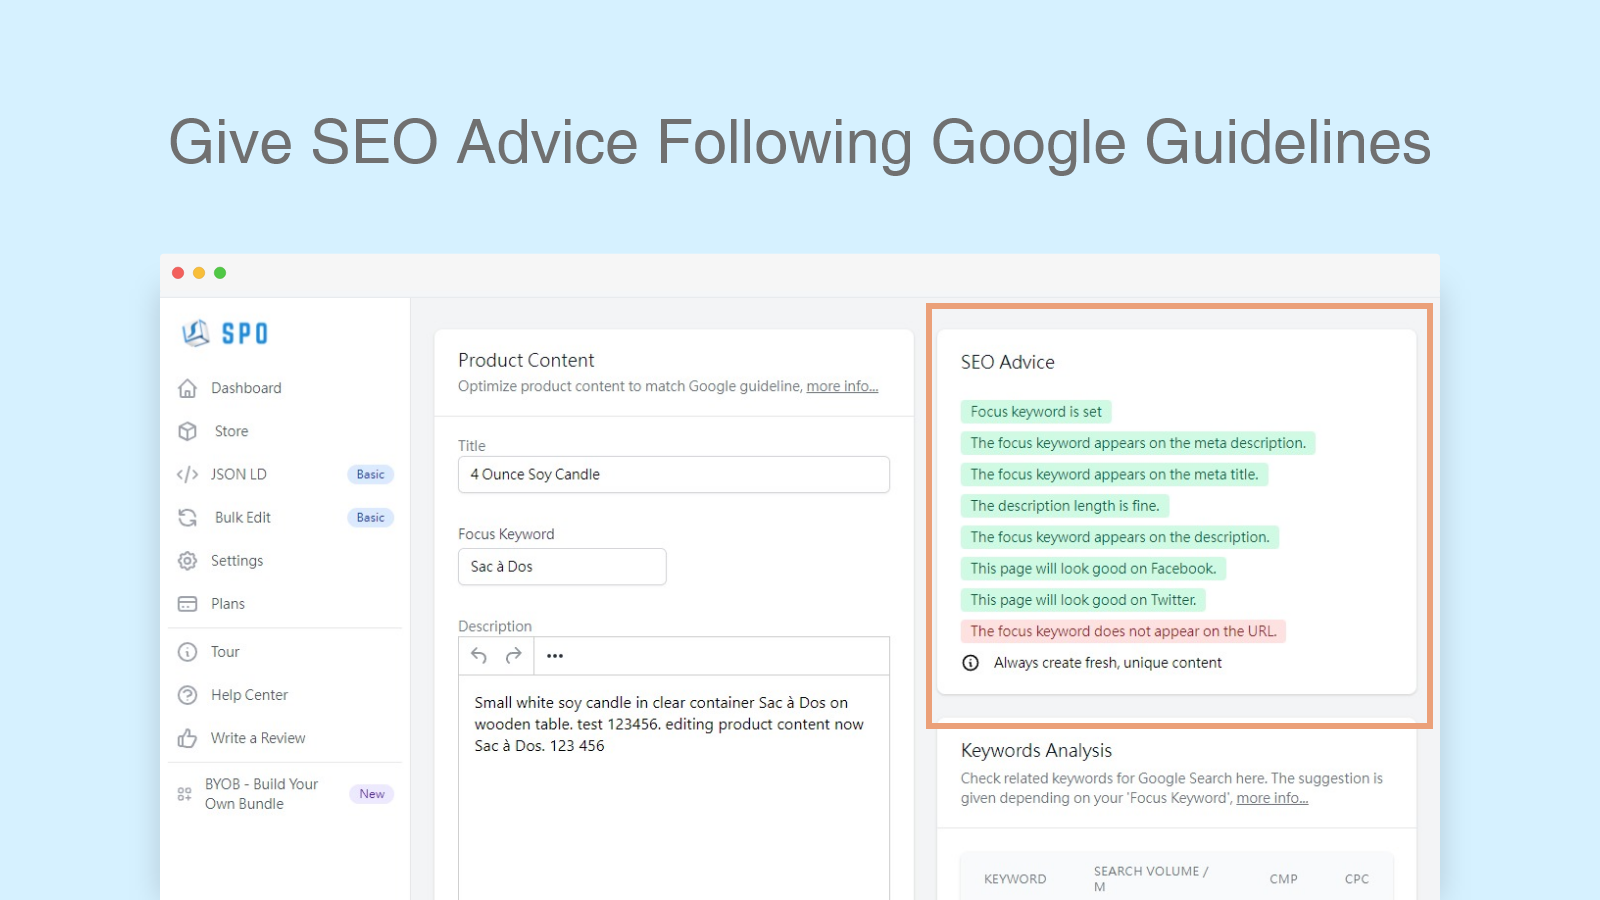 Give SEO Advice Following Google Guidelines